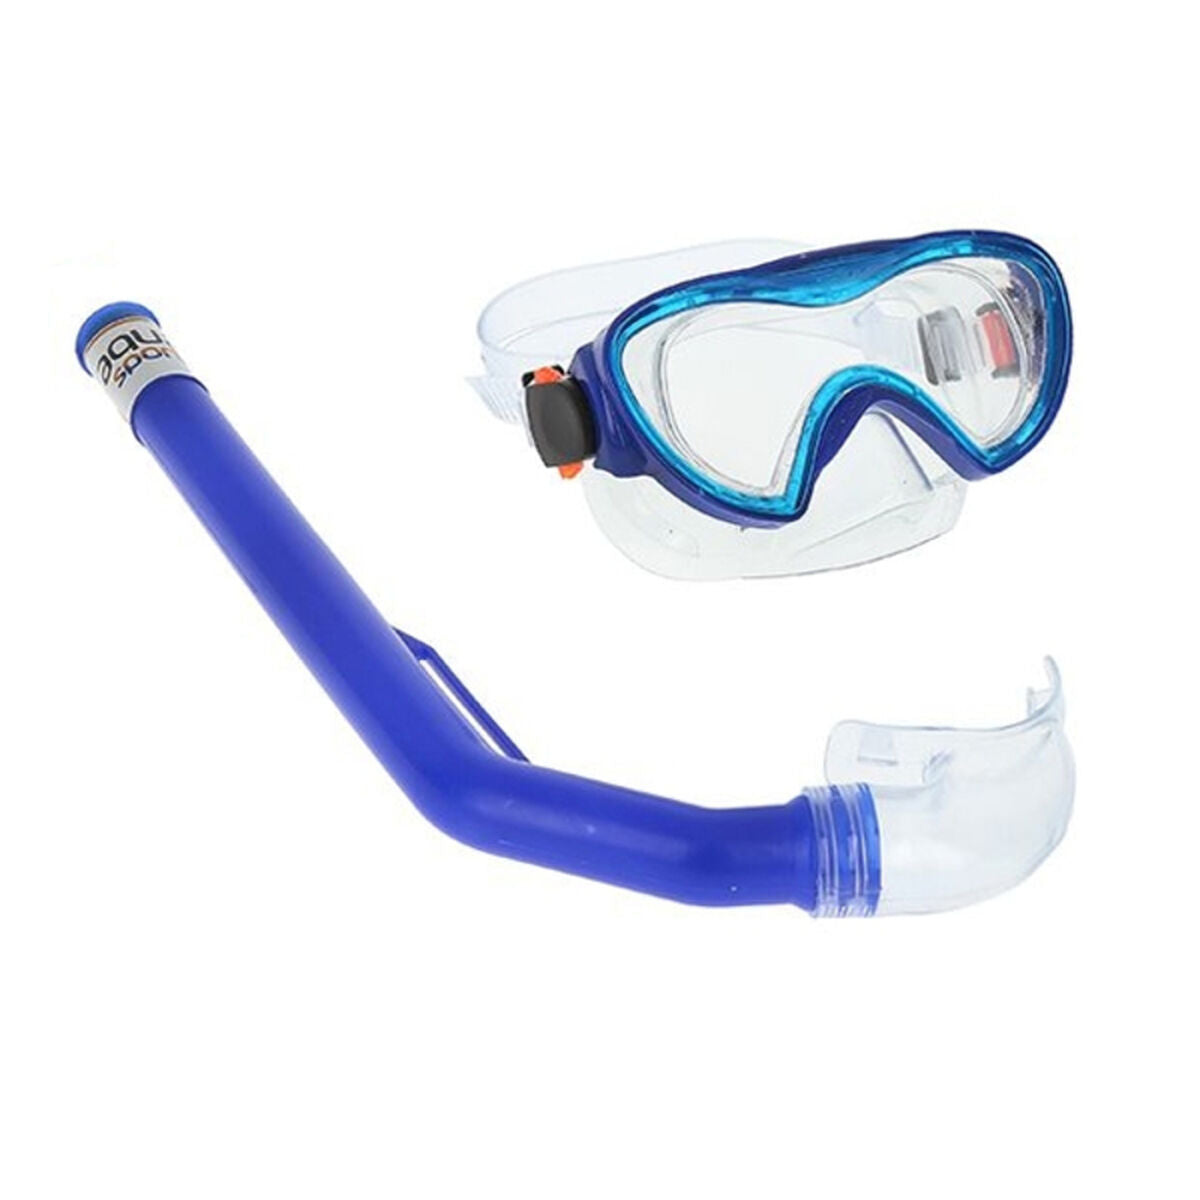 Snorkel Goggles and Tube for Children Junior Colorbaby Blue Black